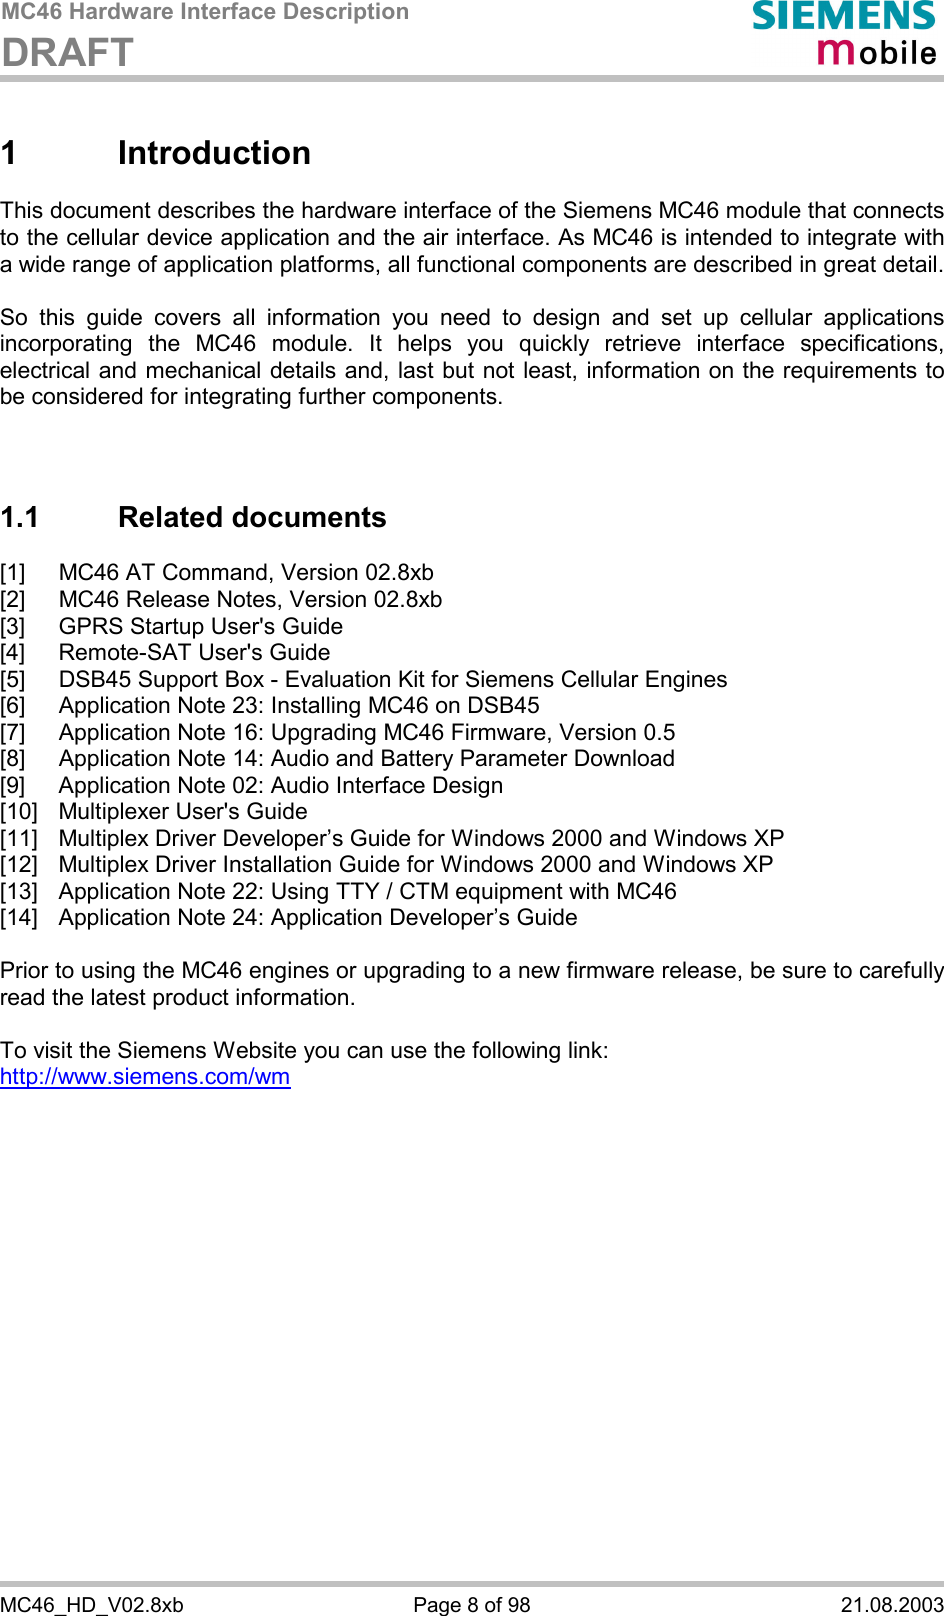 MC46 Hardware Interface Description DRAFT      MC46_HD_V02.8xb  Page 8 of 98  21.08.2003 1 Introduction This document describes the hardware interface of the Siemens MC46 module that connects to the cellular device application and the air interface. As MC46 is intended to integrate with a wide range of application platforms, all functional components are described in great detail.  So this guide covers all information you need to design and set up cellular applications incorporating the MC46 module. It helps you quickly retrieve interface specifications, electrical and mechanical details and, last but not least, information on the requirements to be considered for integrating further components.    1.1 Related documents [1]  MC46 AT Command, Version 02.8xb [2]  MC46 Release Notes, Version 02.8xb [3]  GPRS Startup User&apos;s Guide [4]  Remote-SAT User&apos;s Guide [5]  DSB45 Support Box - Evaluation Kit for Siemens Cellular Engines [6]  Application Note 23: Installing MC46 on DSB45 [7]  Application Note 16: Upgrading MC46 Firmware, Version 0.5 [8]  Application Note 14: Audio and Battery Parameter Download [9]  Application Note 02: Audio Interface Design [10]  Multiplexer User&apos;s Guide [11]  Multiplex Driver Developer’s Guide for Windows 2000 and Windows XP [12]  Multiplex Driver Installation Guide for Windows 2000 and Windows XP [13]  Application Note 22: Using TTY / CTM equipment with MC46 [14]  Application Note 24: Application Developer’s Guide  Prior to using the MC46 engines or upgrading to a new firmware release, be sure to carefully read the latest product information.  To visit the Siemens Website you can use the following link: http://www.siemens.com/wm   